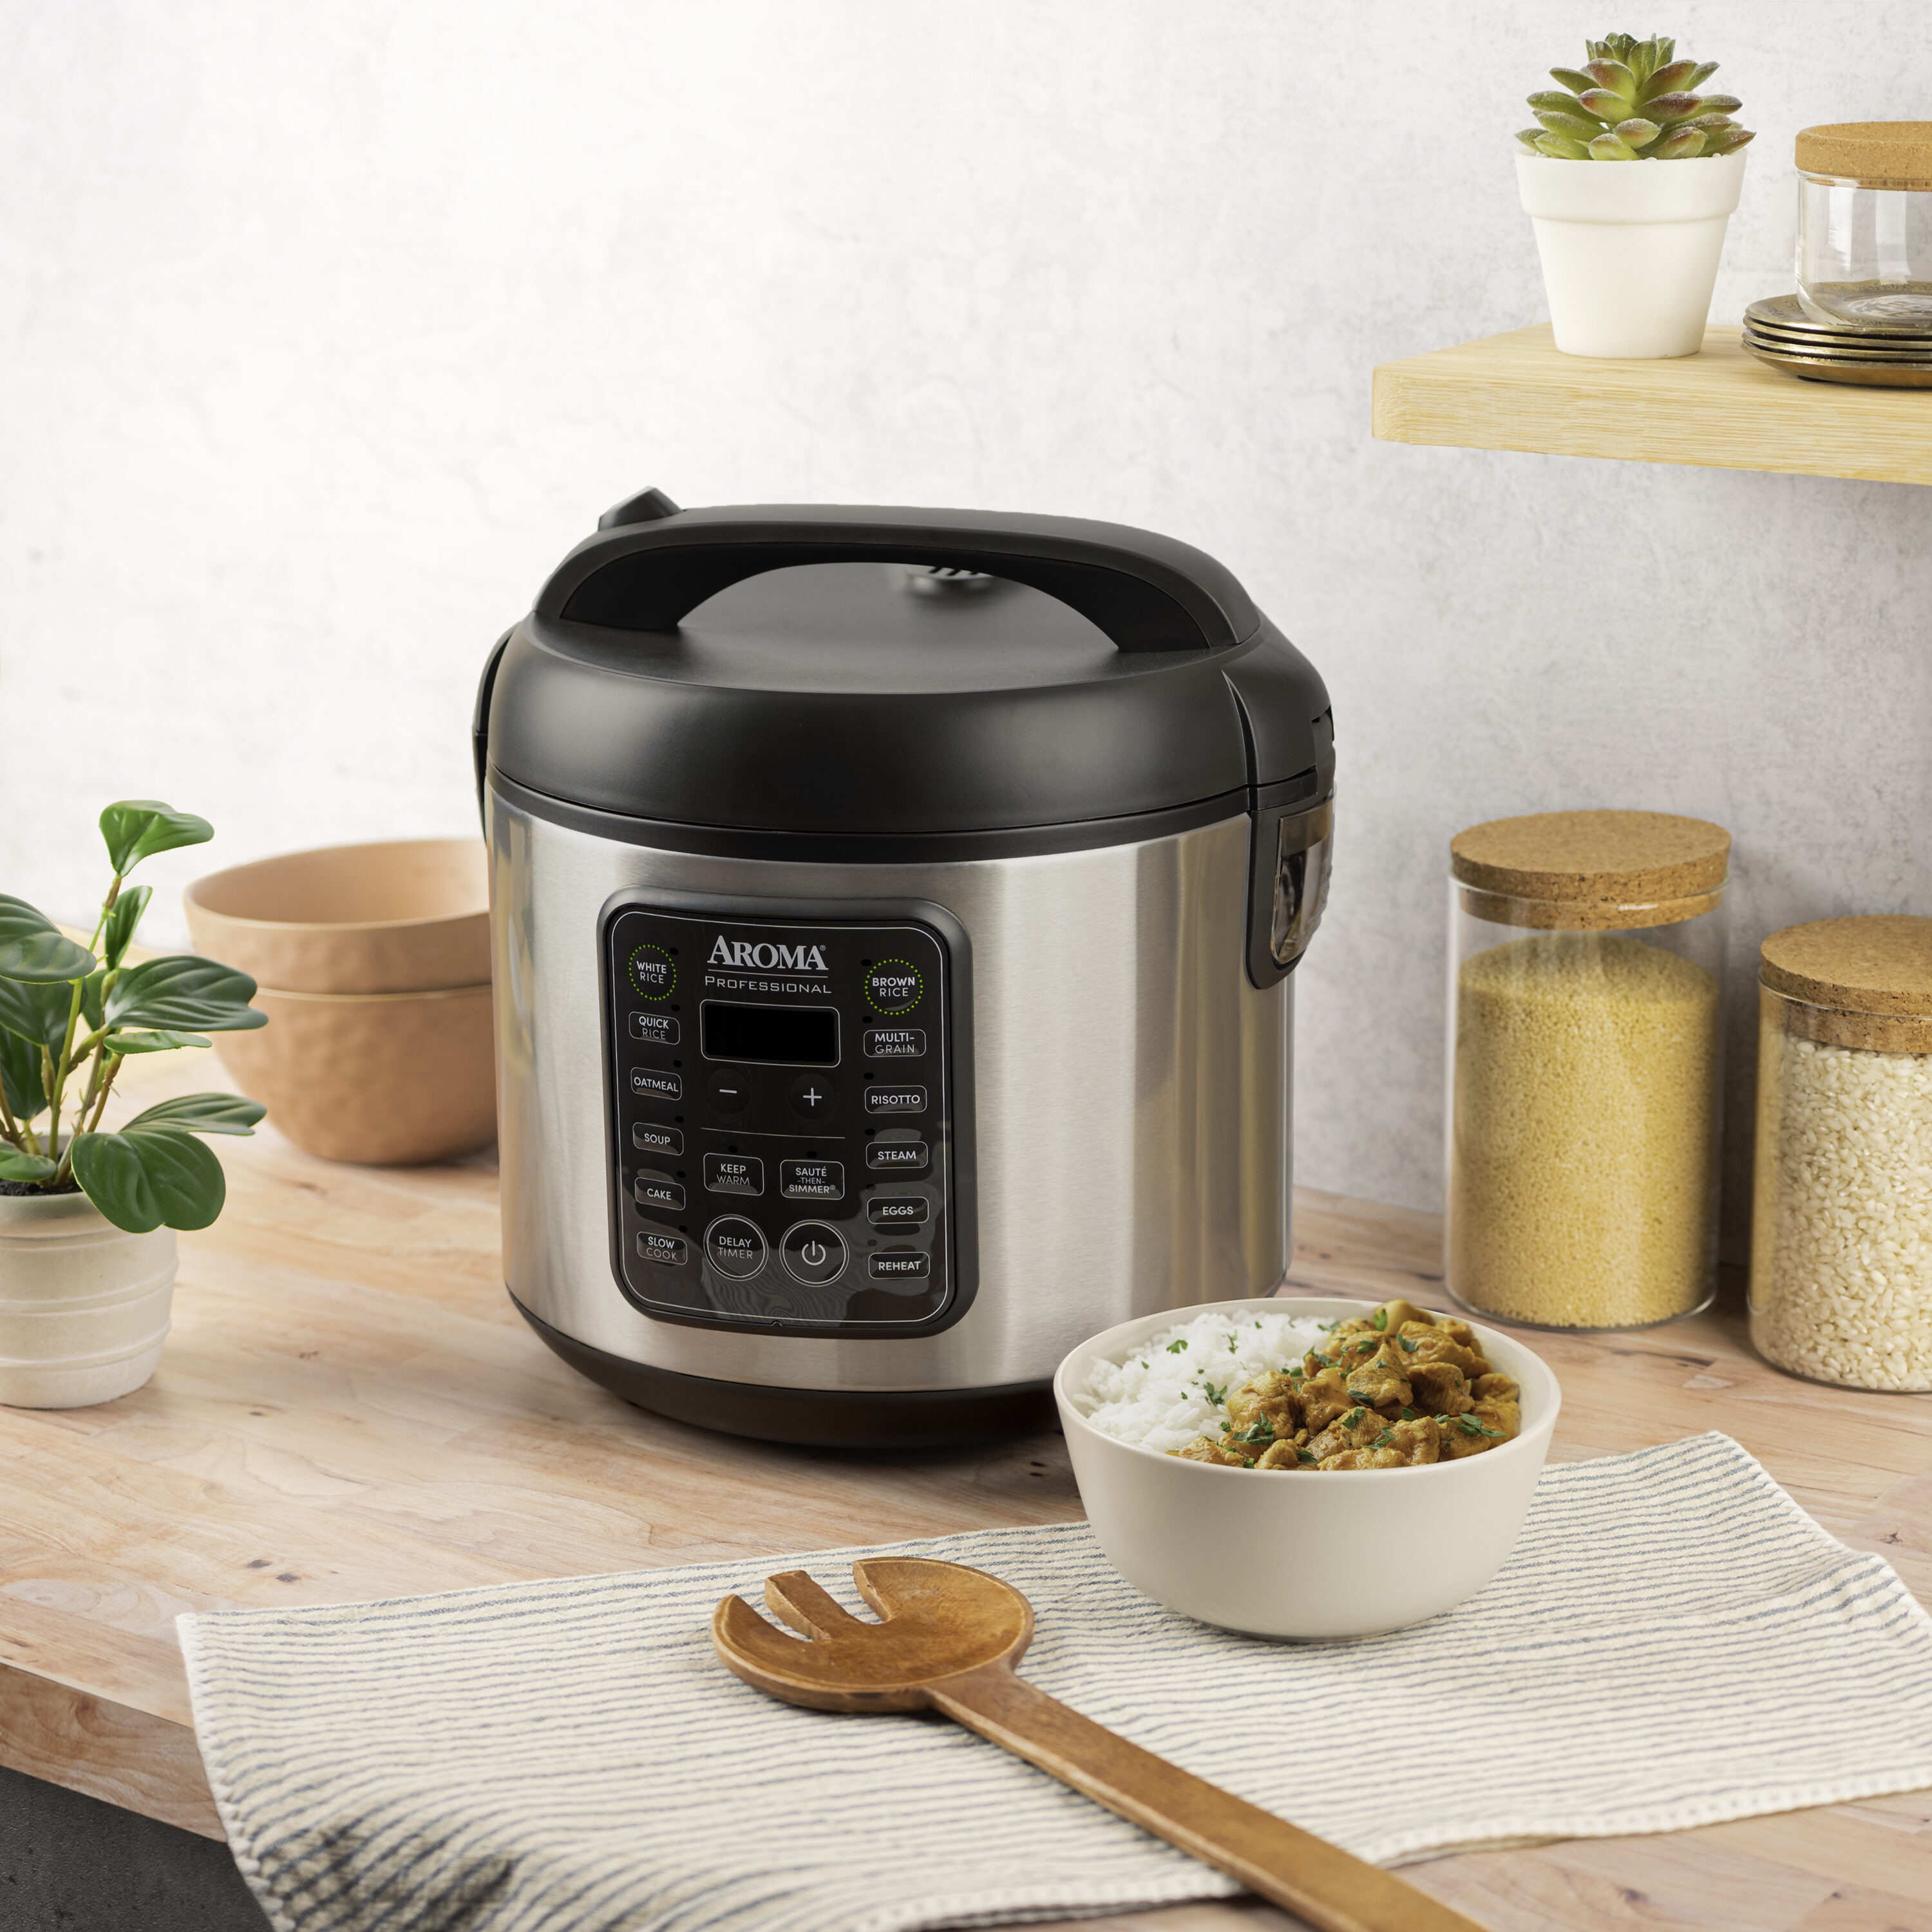 Aroma 20-Cup Programmable Rice Cooker at